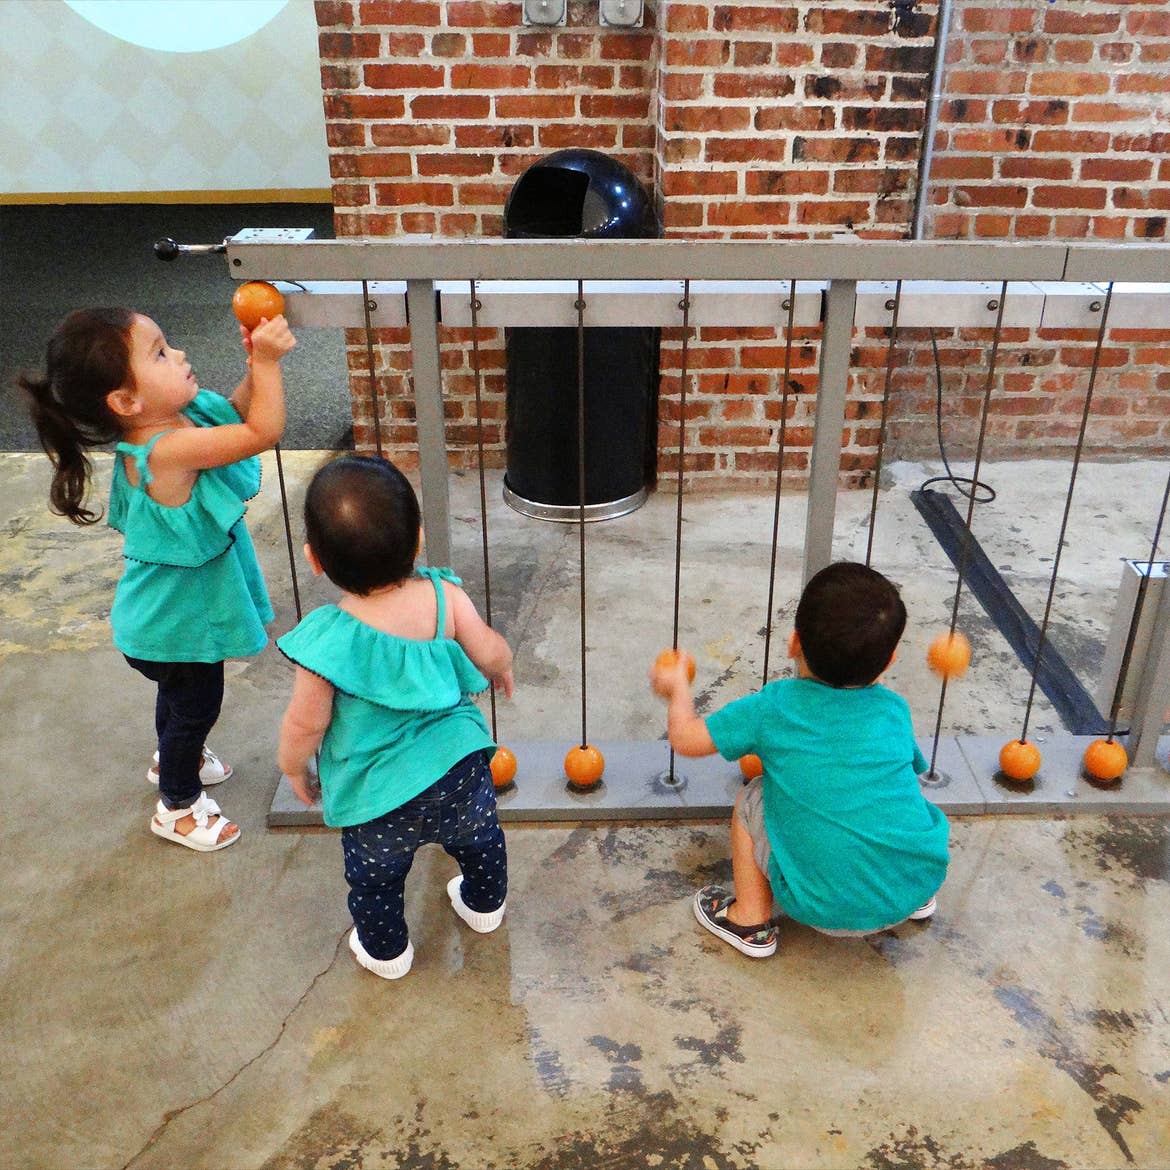 Three toddlers in matching denim and teal shirts interact with a display indoors.